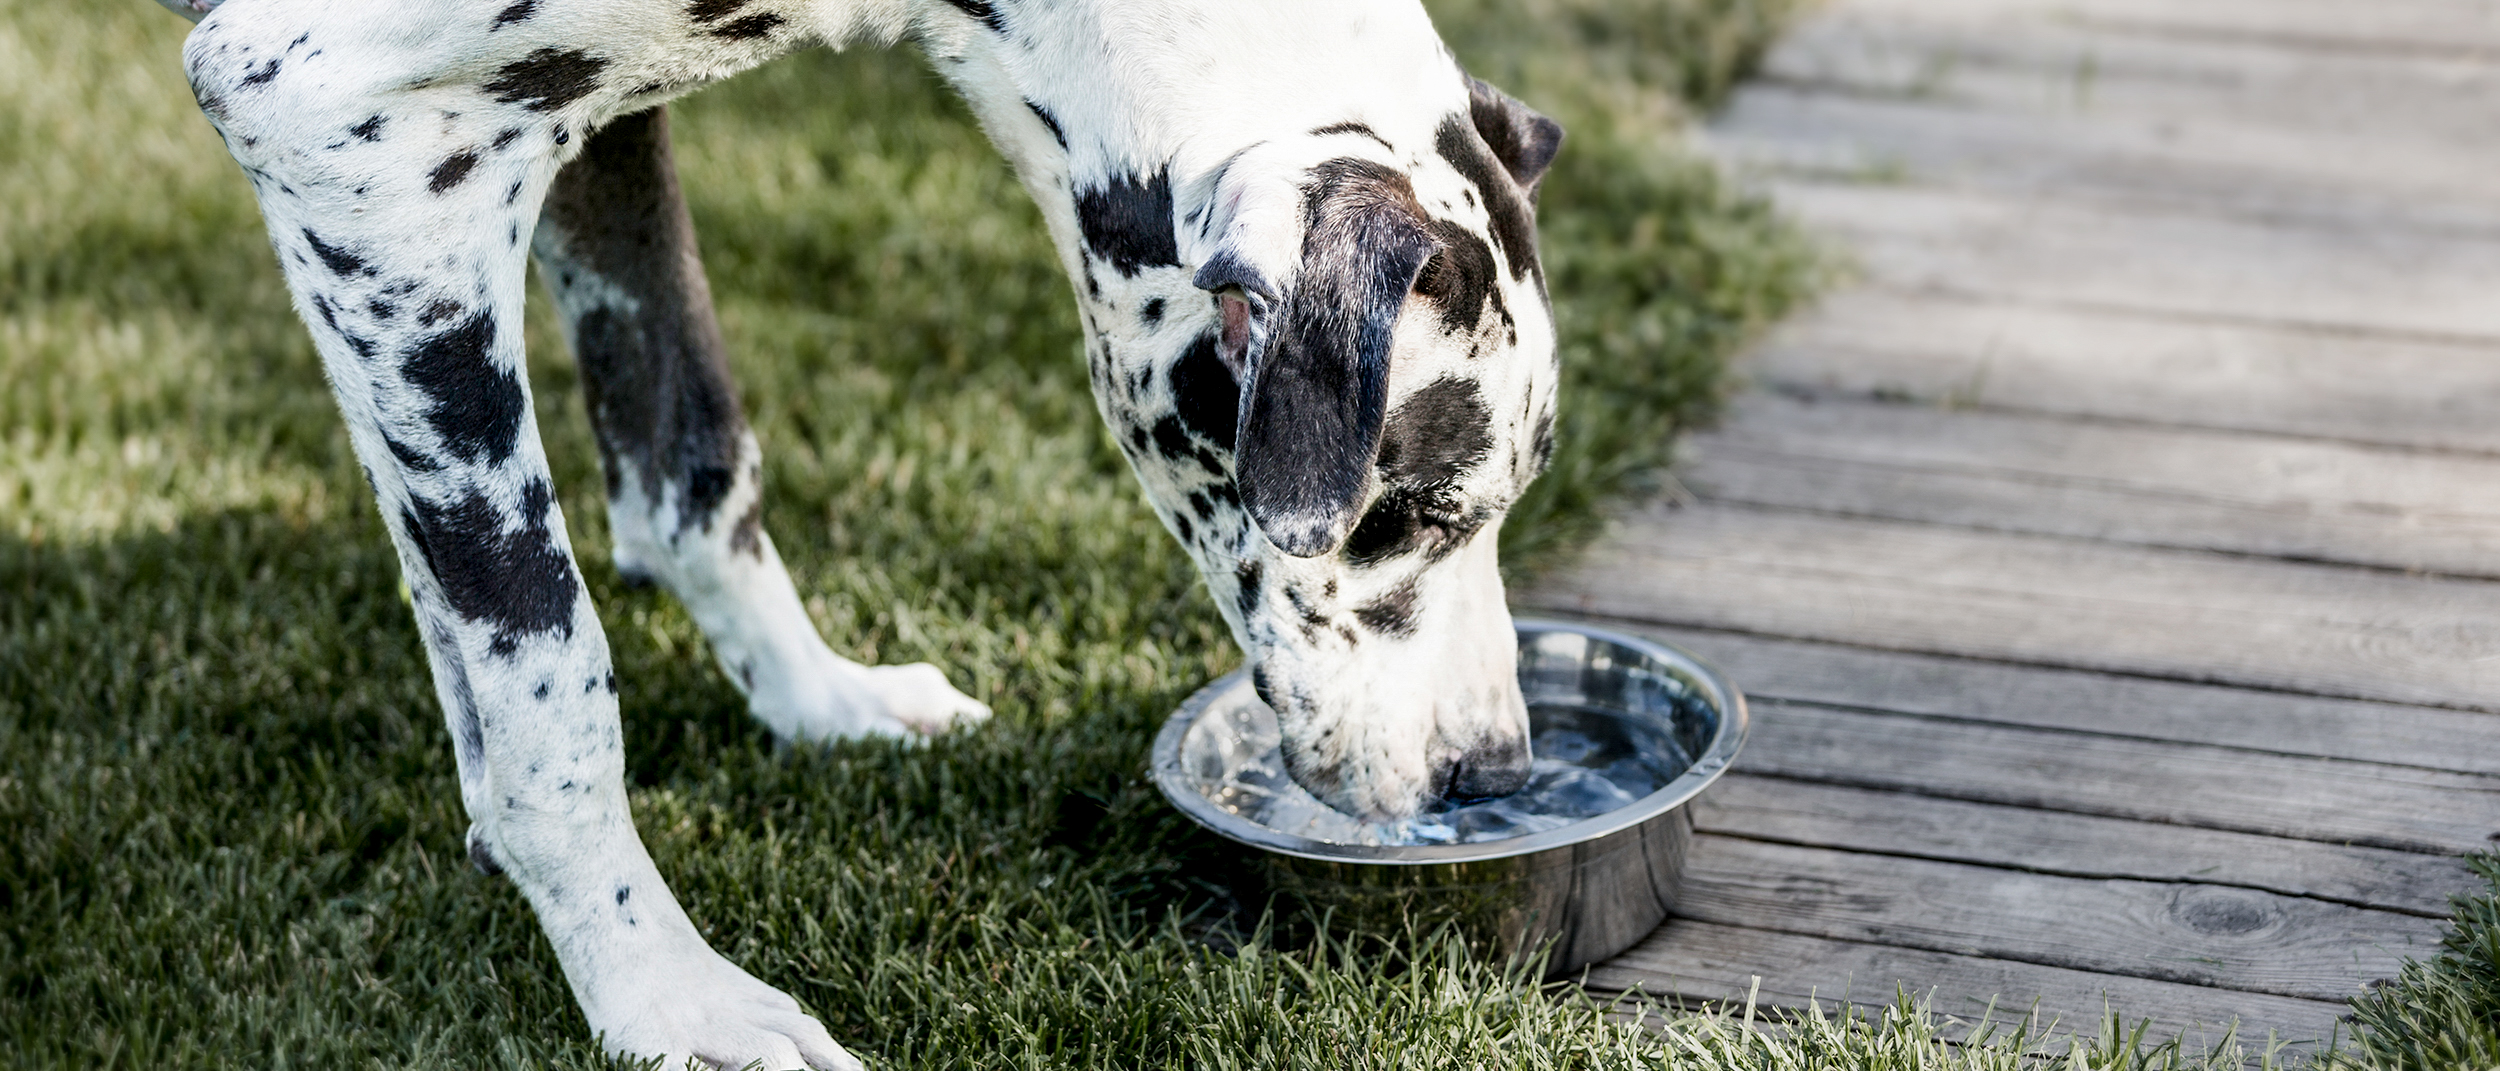 Adult Great Dane standing in a garden drinking from a silver bowl.